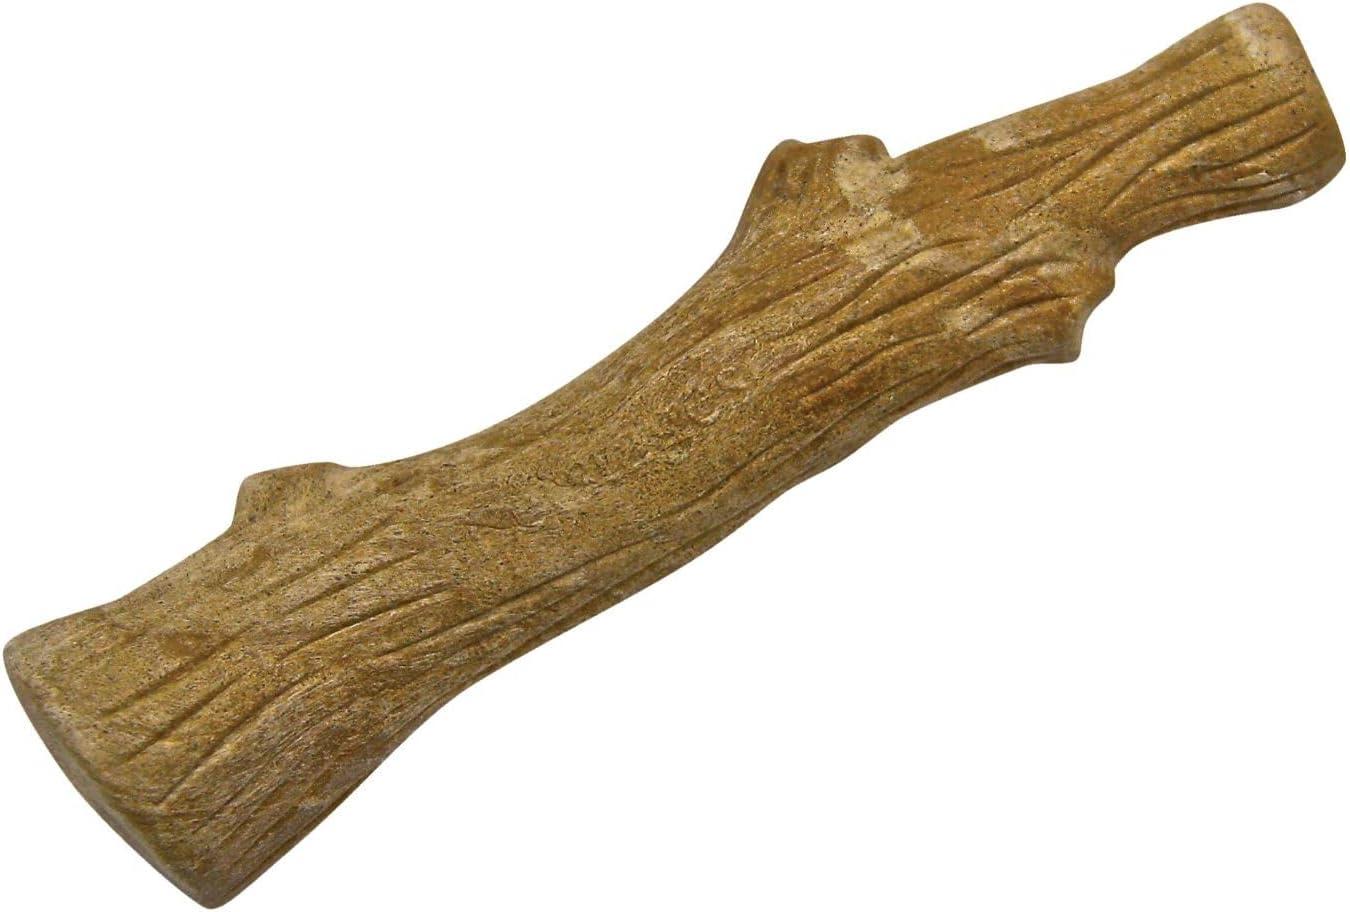 Petstages Wood Alternative 5.38in Dog Chew Stick Toy for $3.03 Shipped